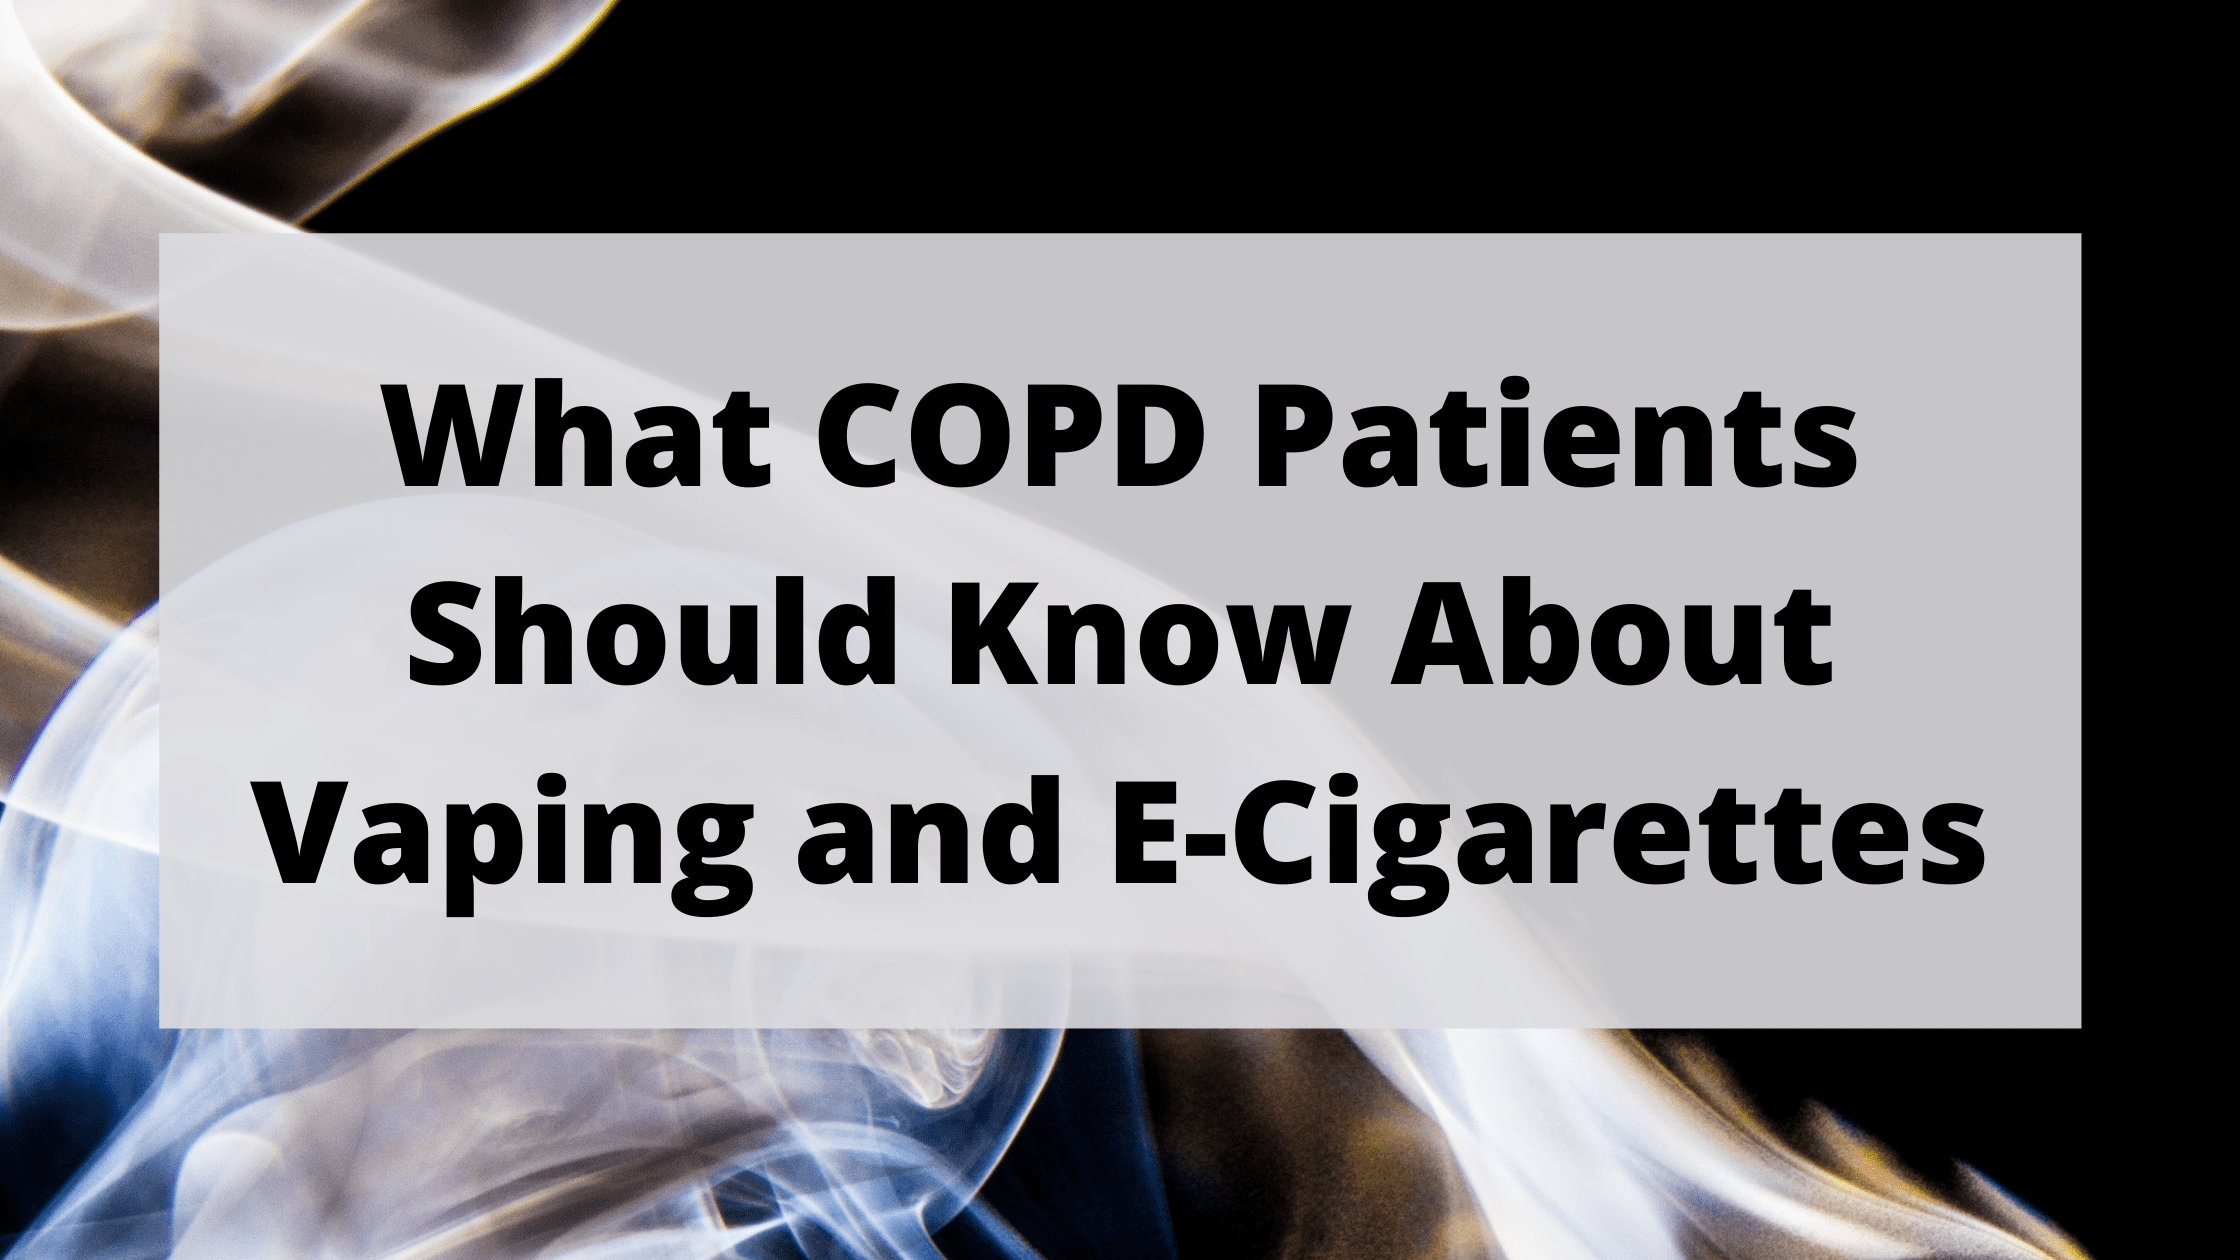 What COPD Patients Should Know About Vaping and E-Cigarettes